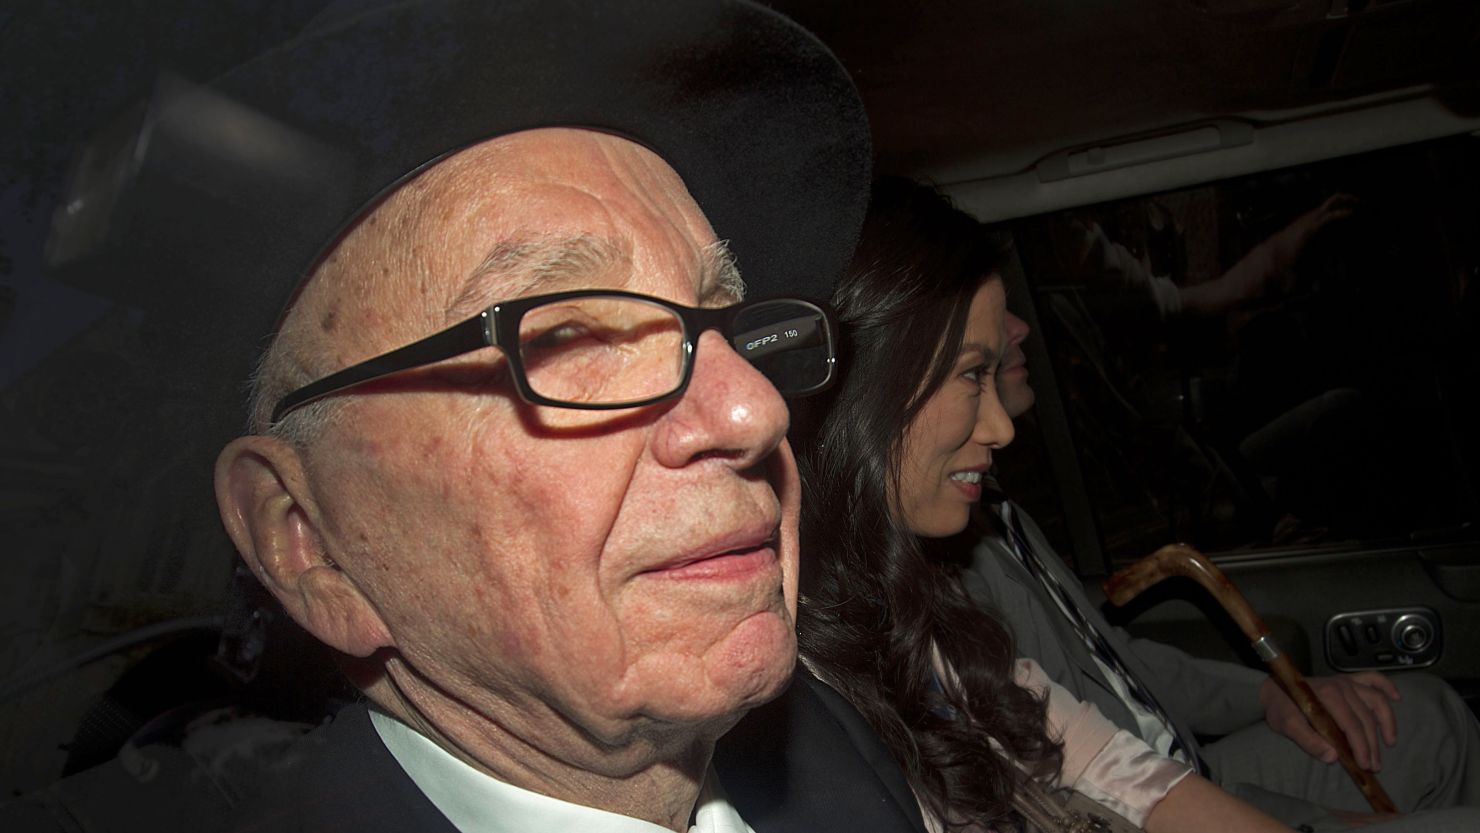 The News Corp. board issued a statement announcing "its full confidence in Rupert Murdoch's fitness" to lead the organization..